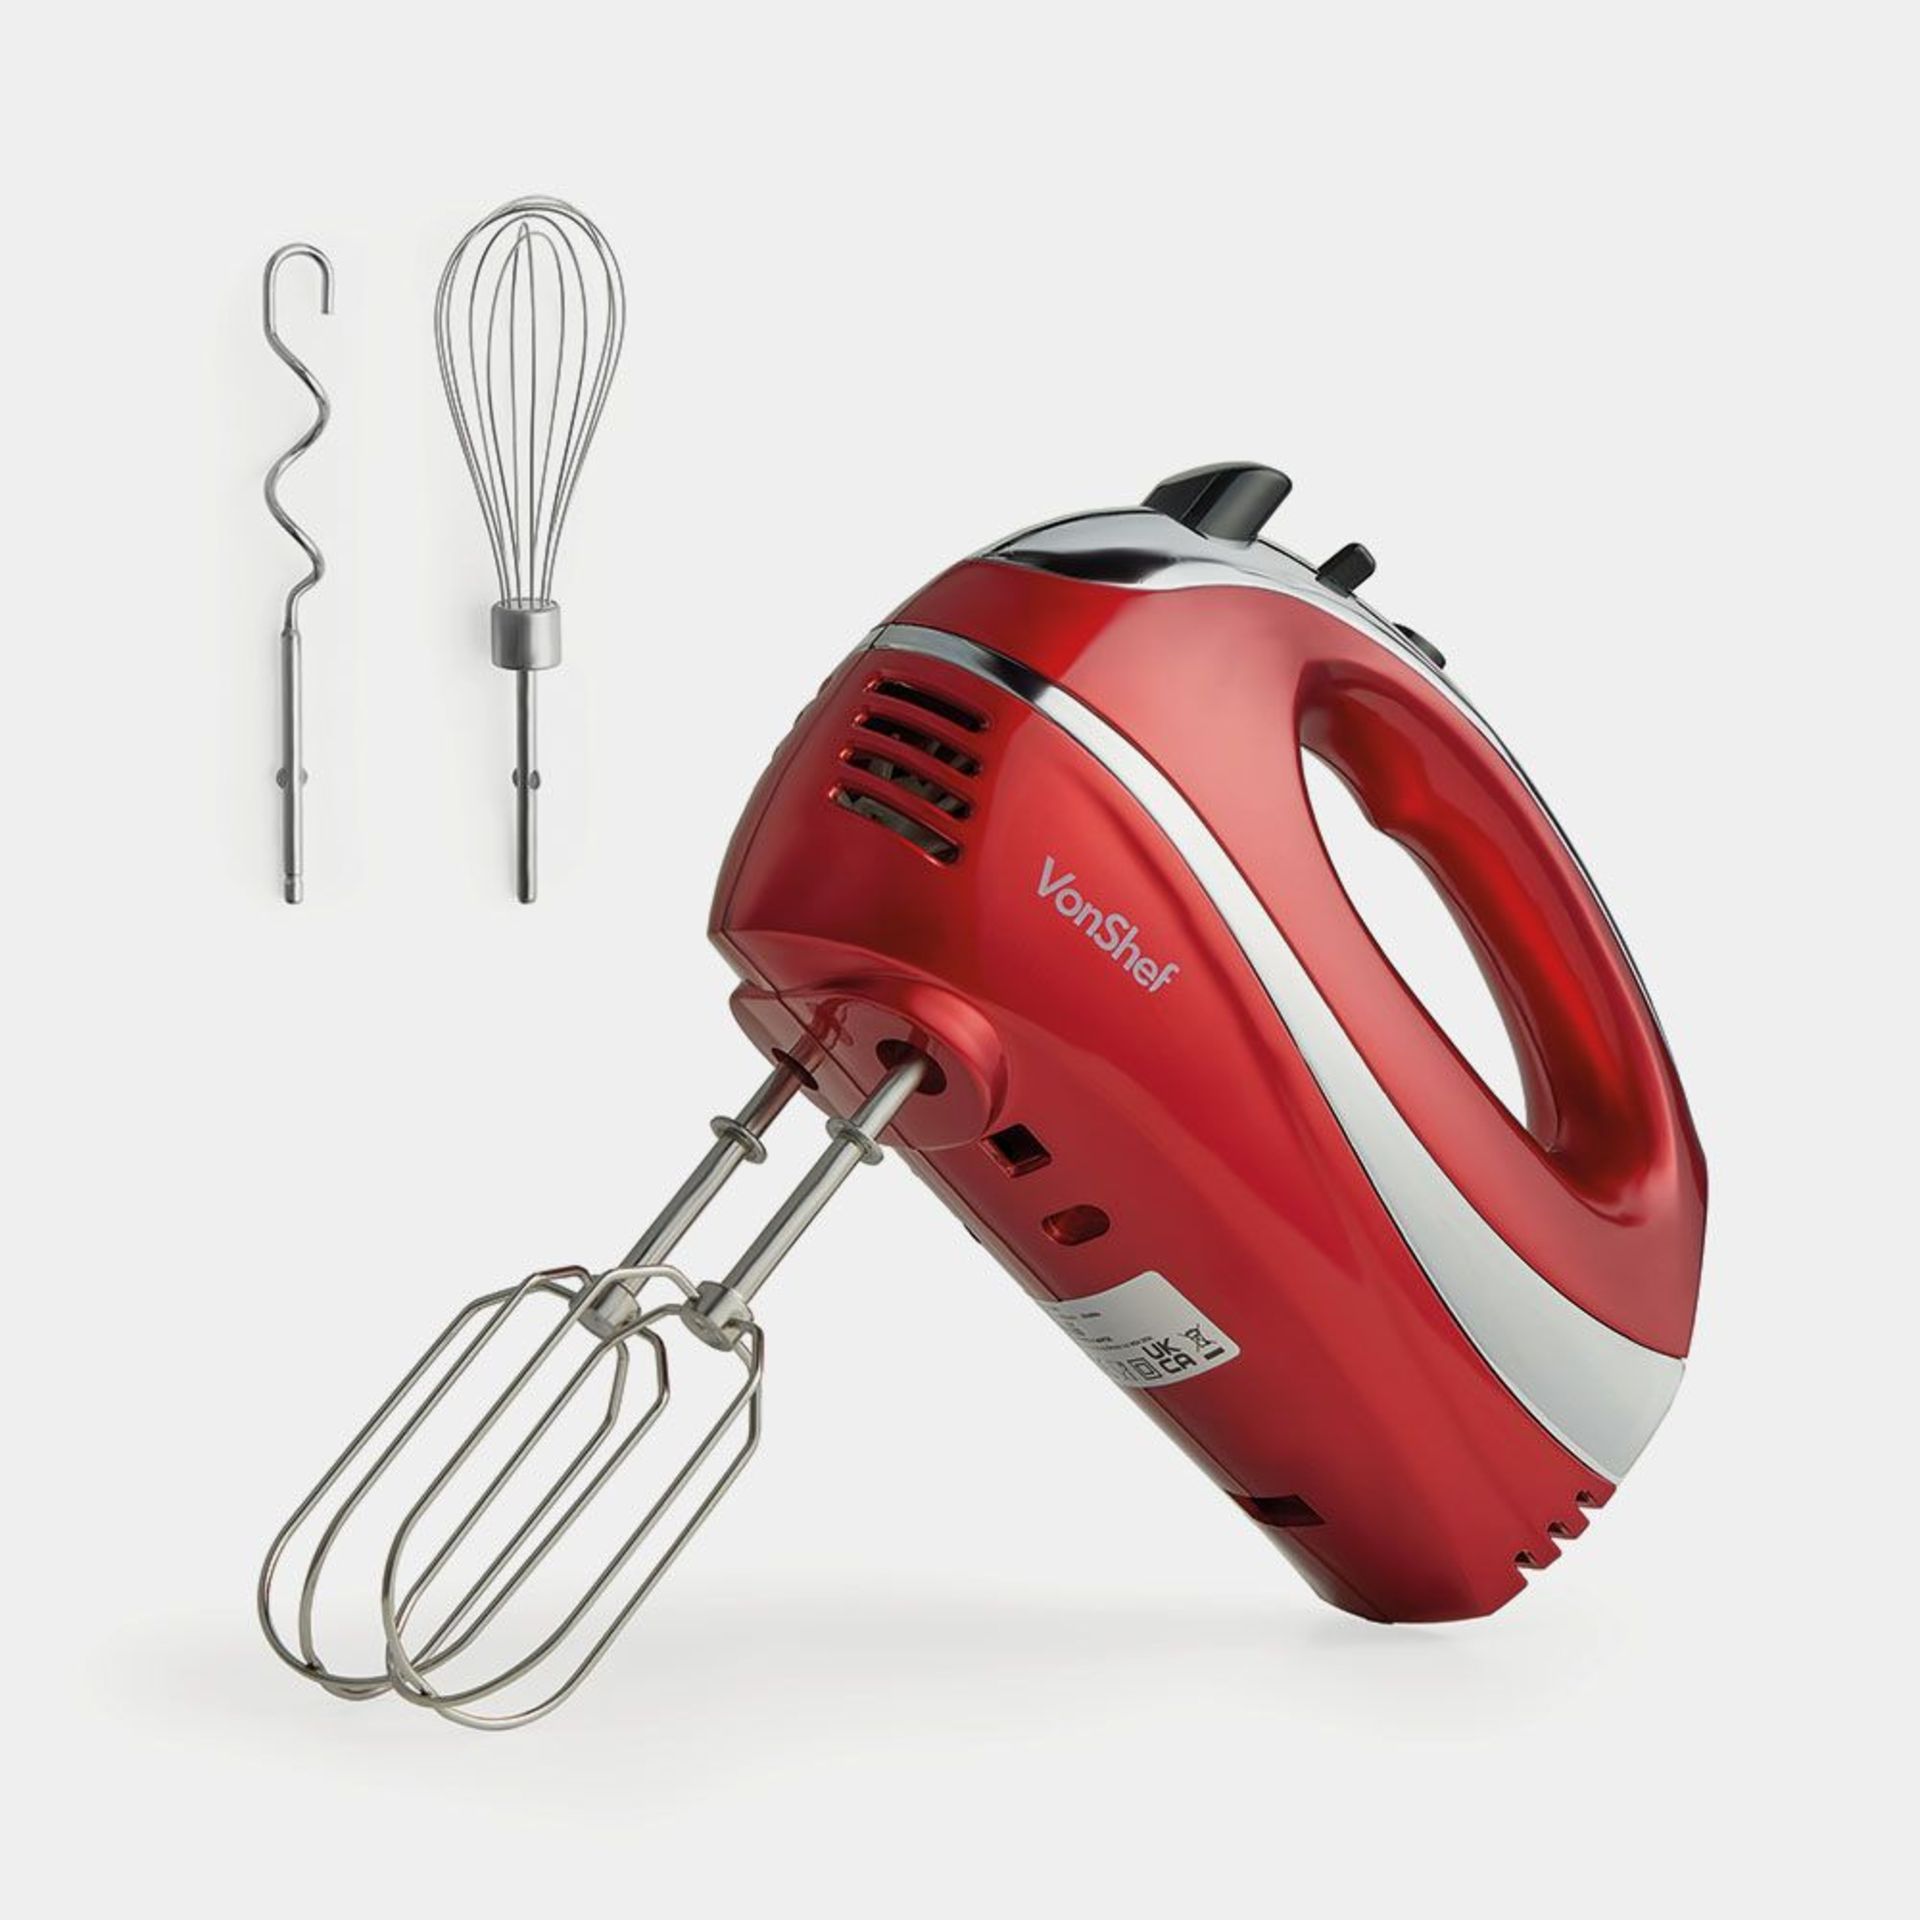 300W Red Hand Mixer. - BI. This is the ultimate kitchen appliance if you love baking and cooking.